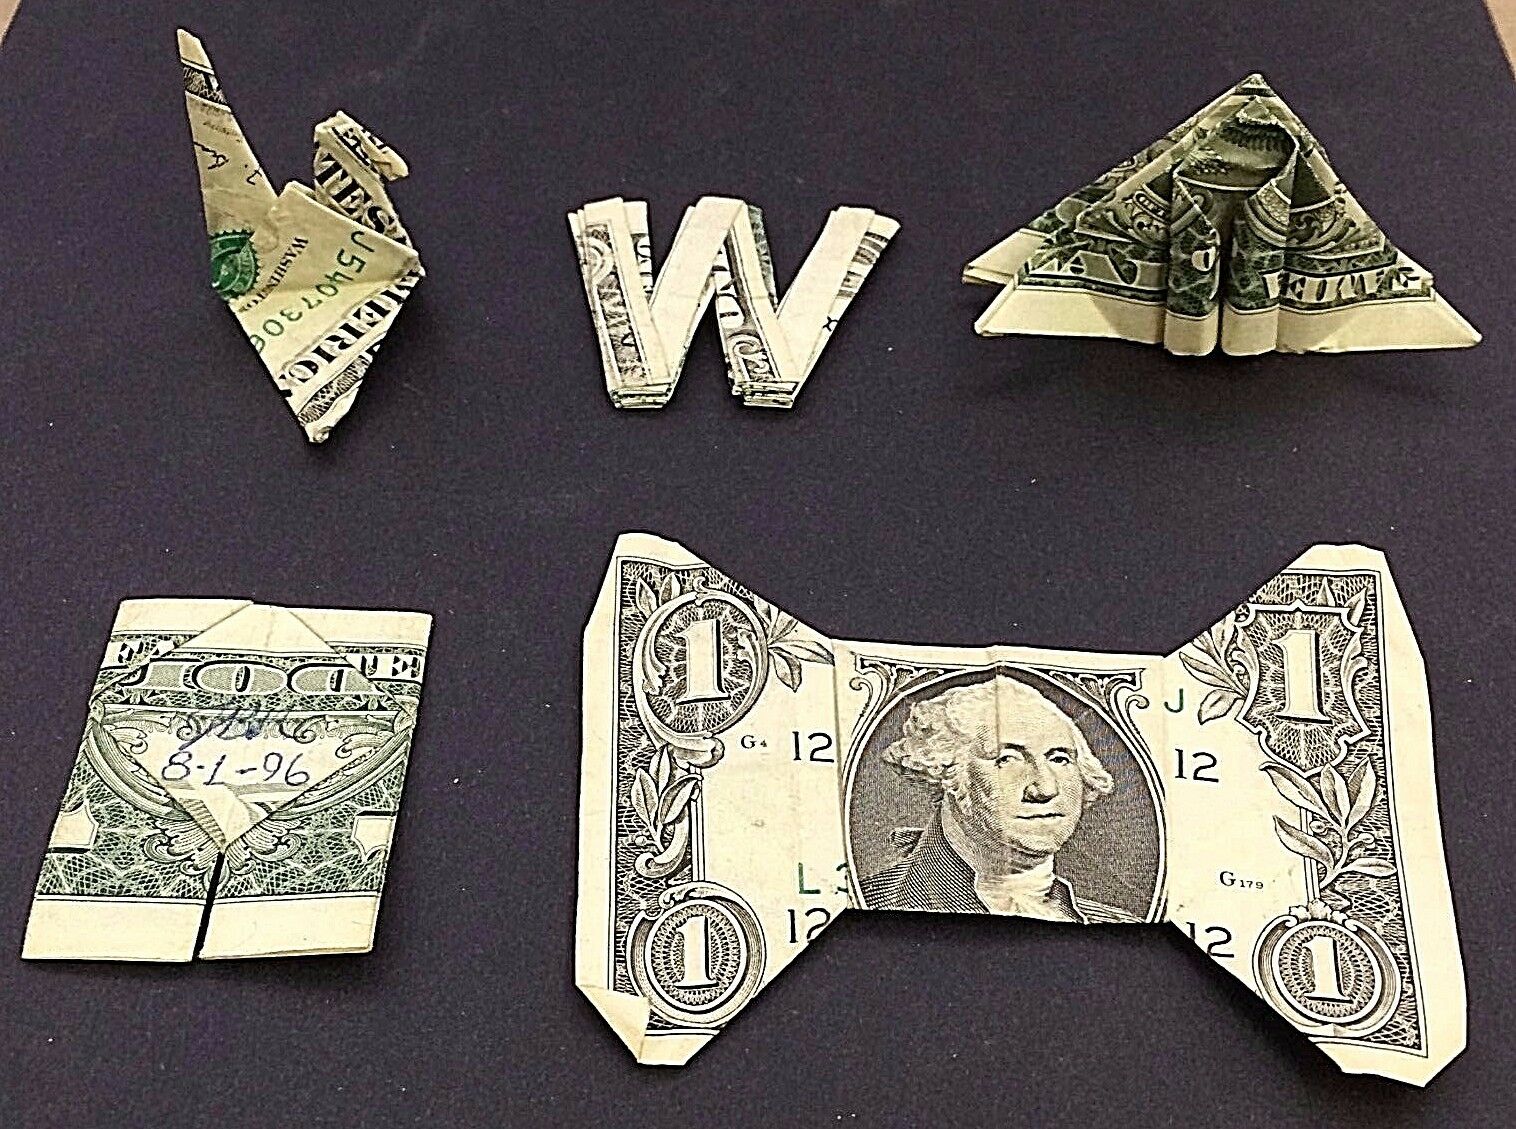 5 JAPAN STYLE ORIGAMI FOLDED USA SMALL $1's BOWTIE BIRD PANTS SPACESHIP M or W